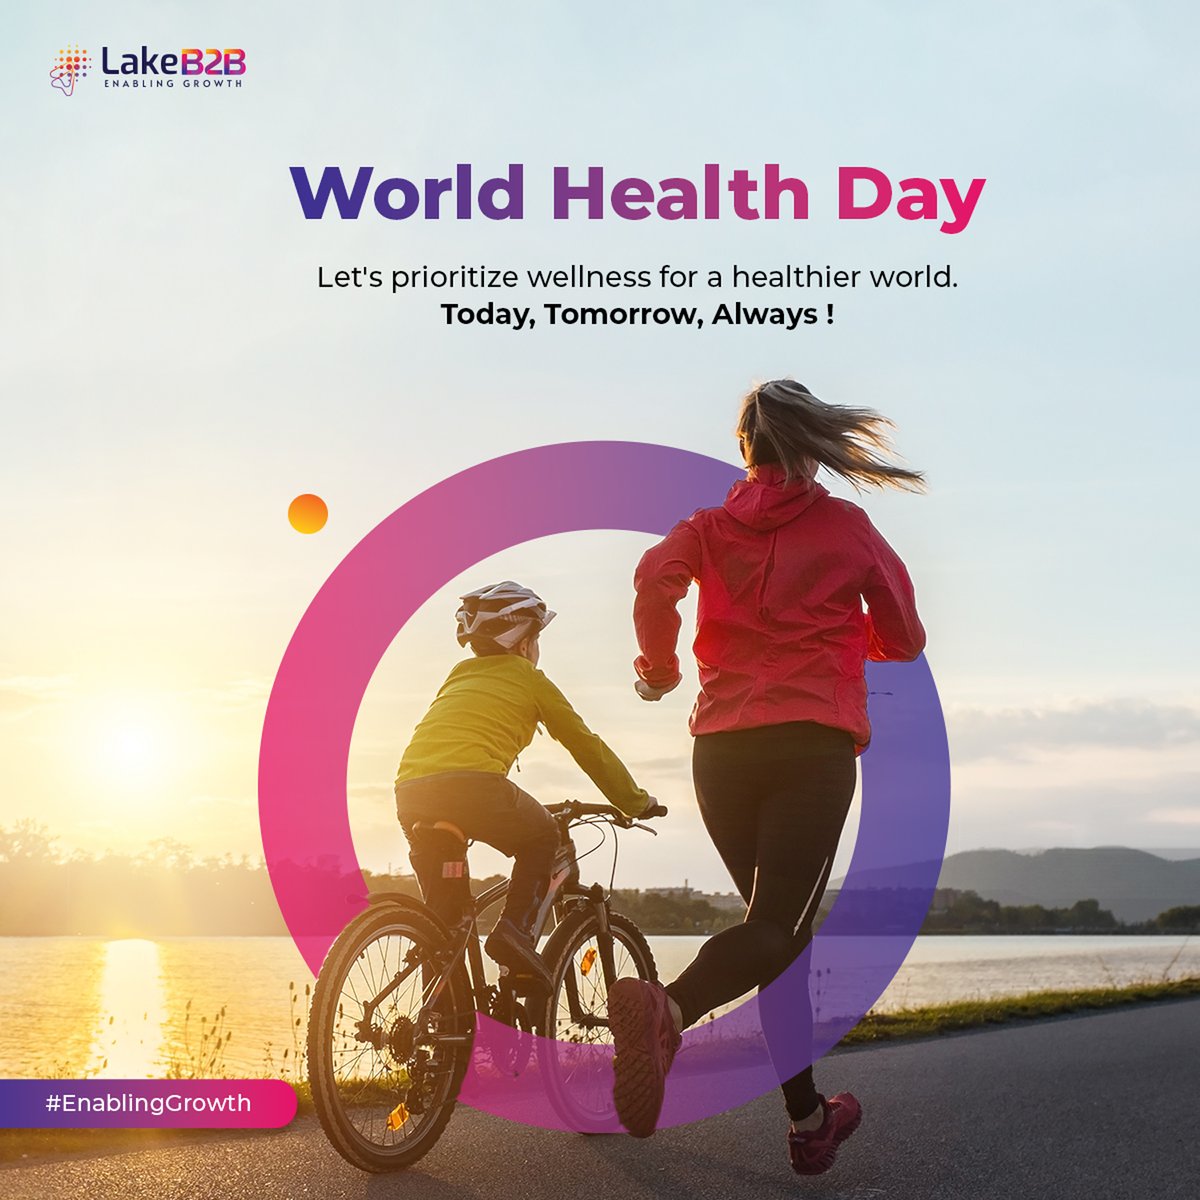 Join us in celebrating #WorldHealthDay! Today, let's prioritize wellness and advocate for universal healthcare access. Together, we can build a healthier future for all. #WorldHealthDay #LakeB2B #EnablingGrowth #HealthForAll #WellnessMatters #Health #Wellness #Healthcare